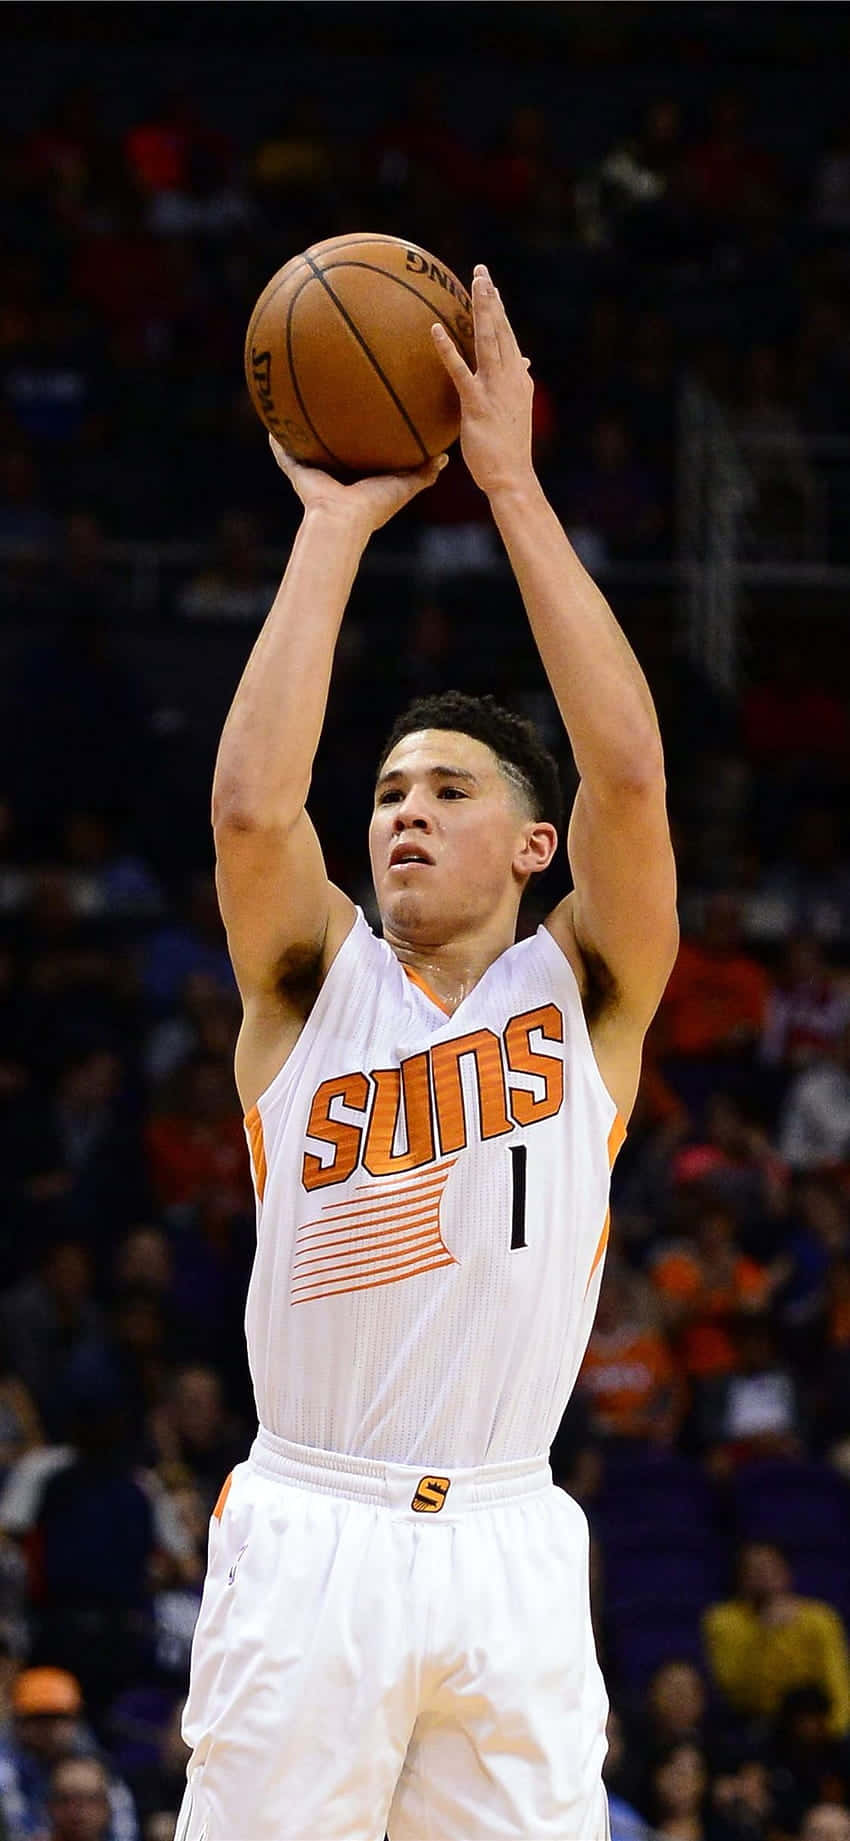 Devin Booker shooting a jump shot with iPhone in hand Wallpaper